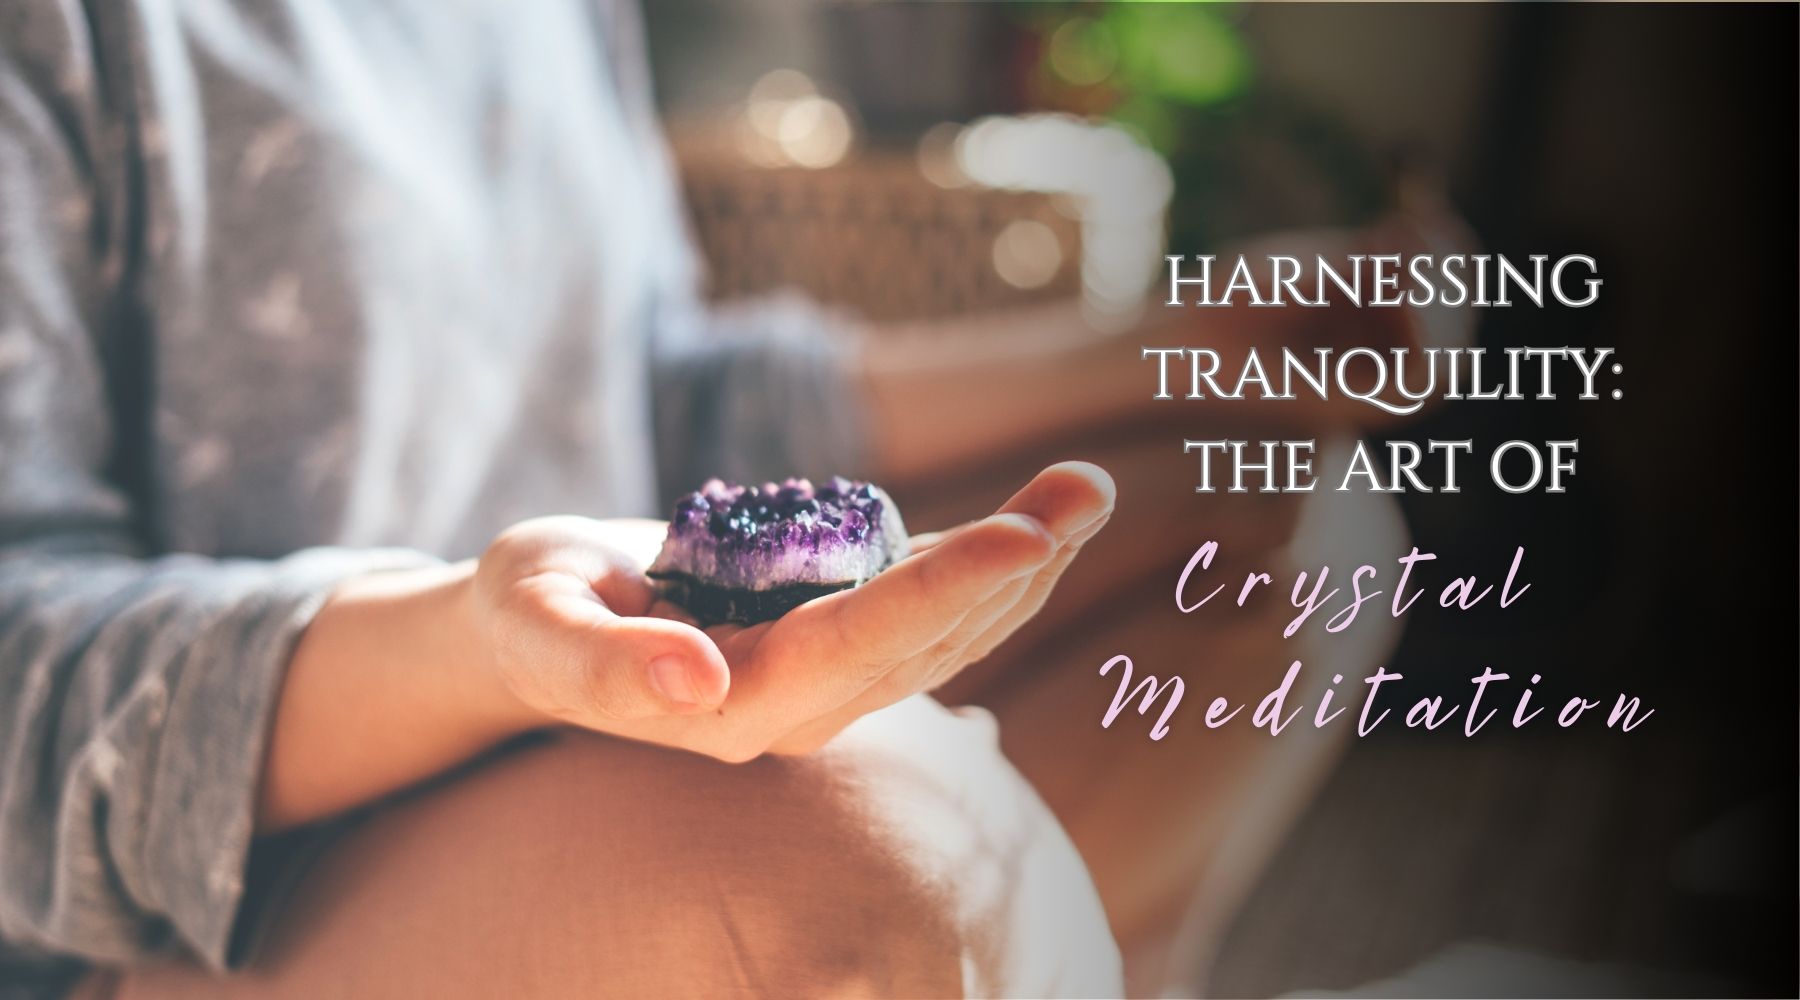 Harnessing Tranquility: The Art of Crystal Meditation